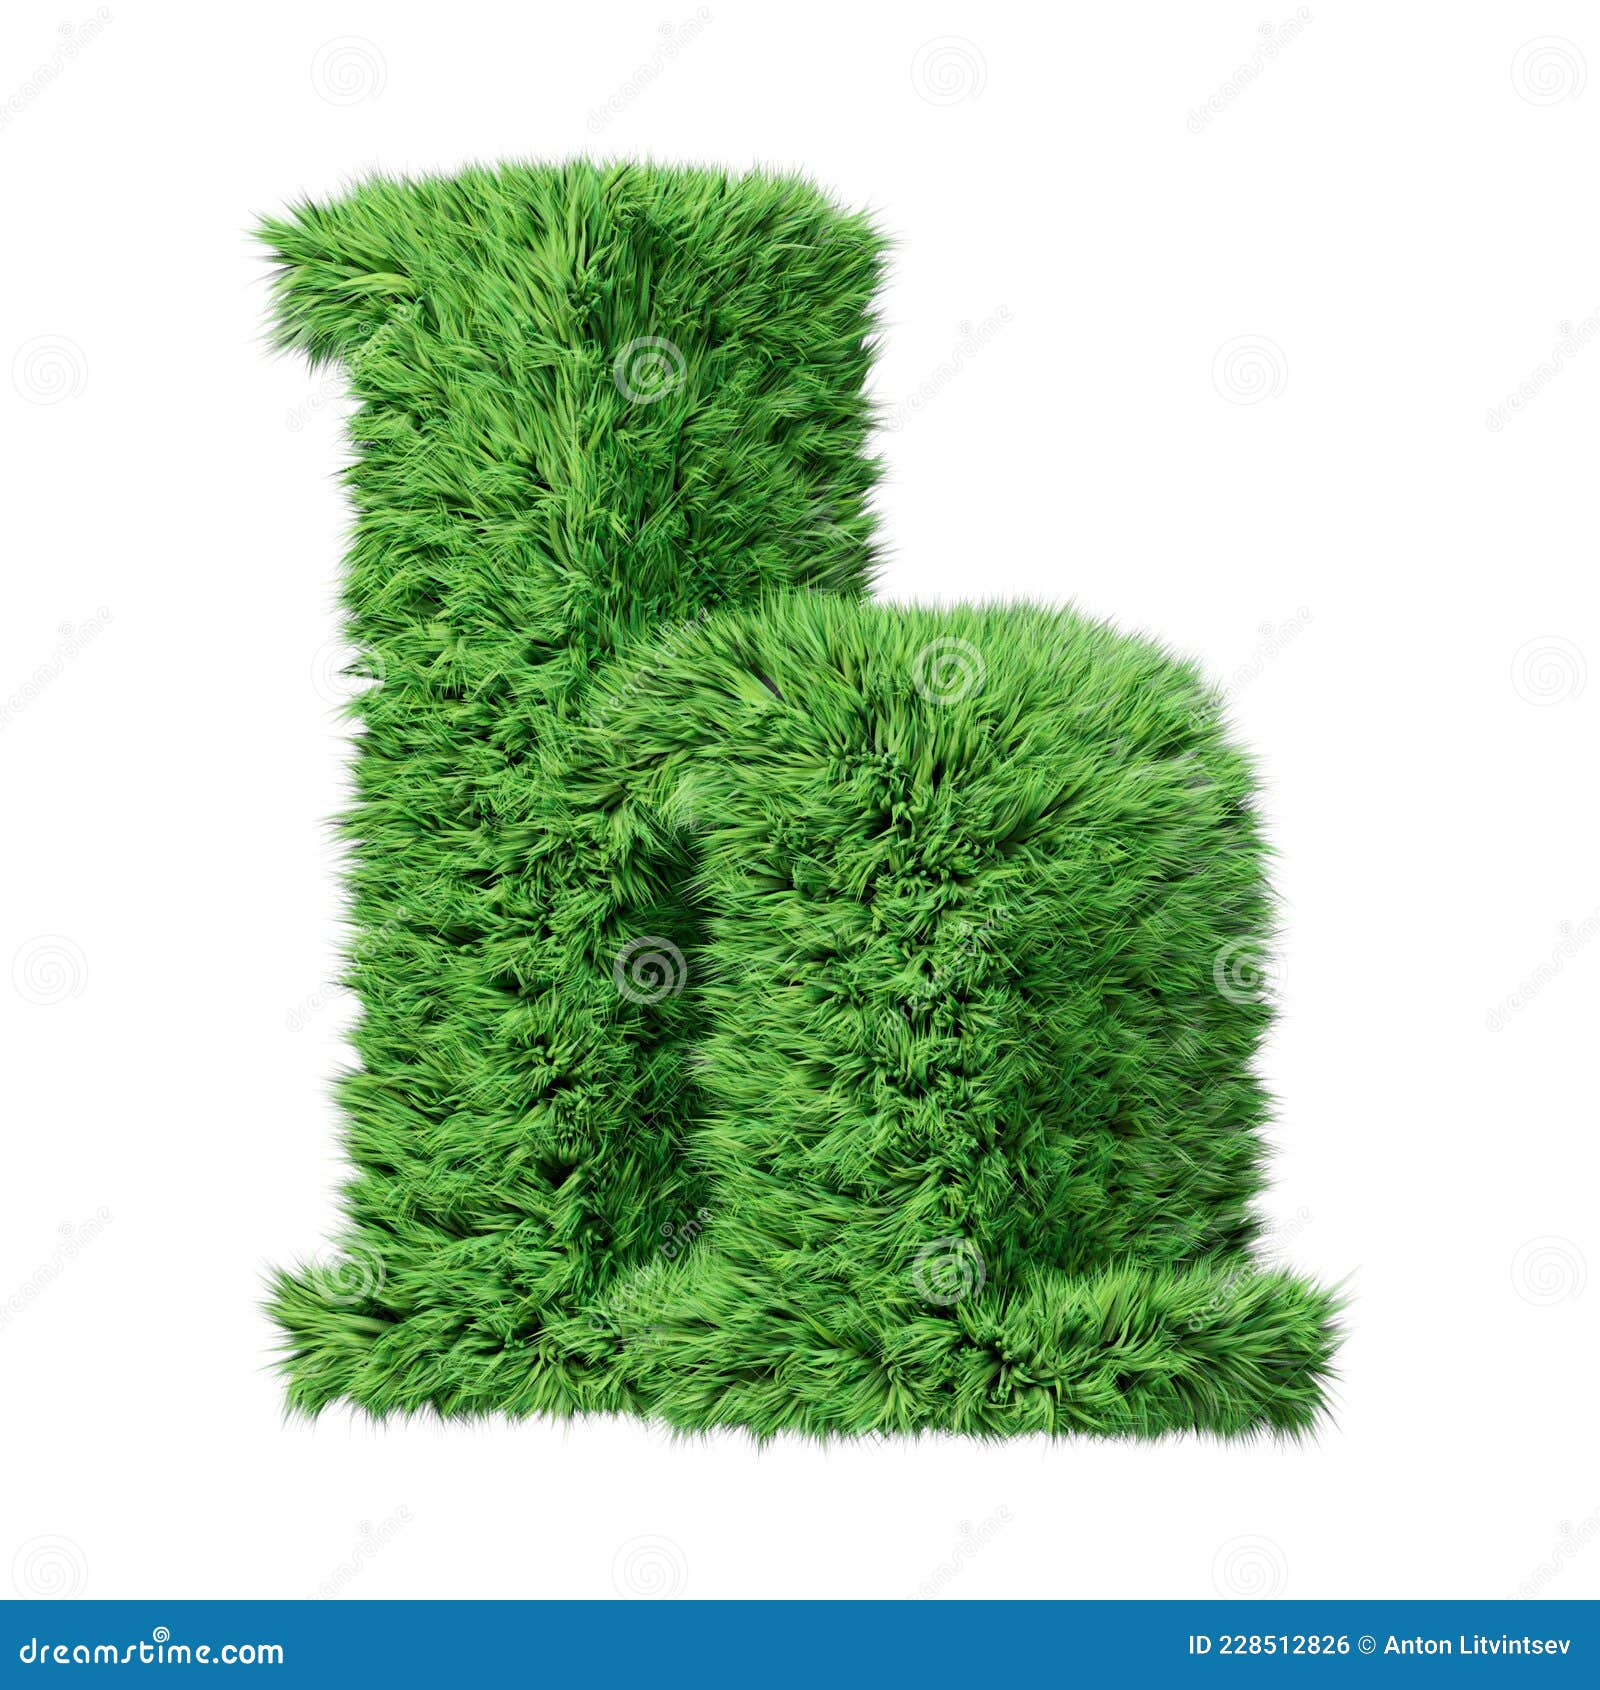 Herbal Grass Alphabet Lowercase Letter H, Turned Clockwise. Isolated on ...